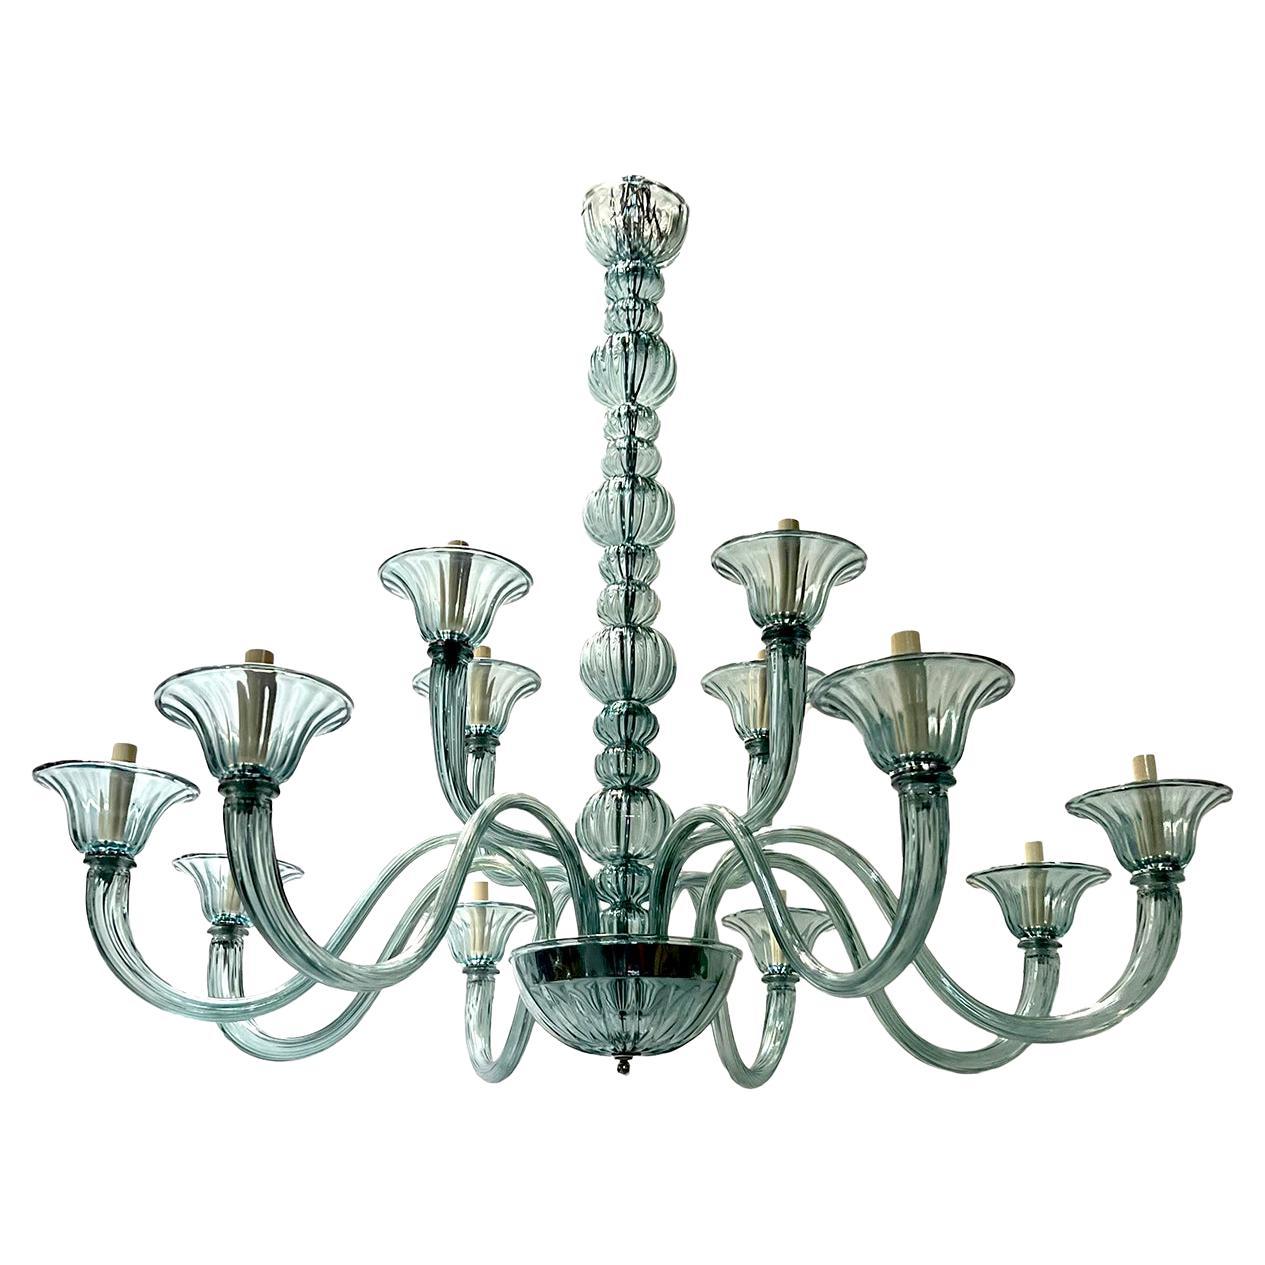 Pair of Vintage Murano Chandeliers, Sold Individually